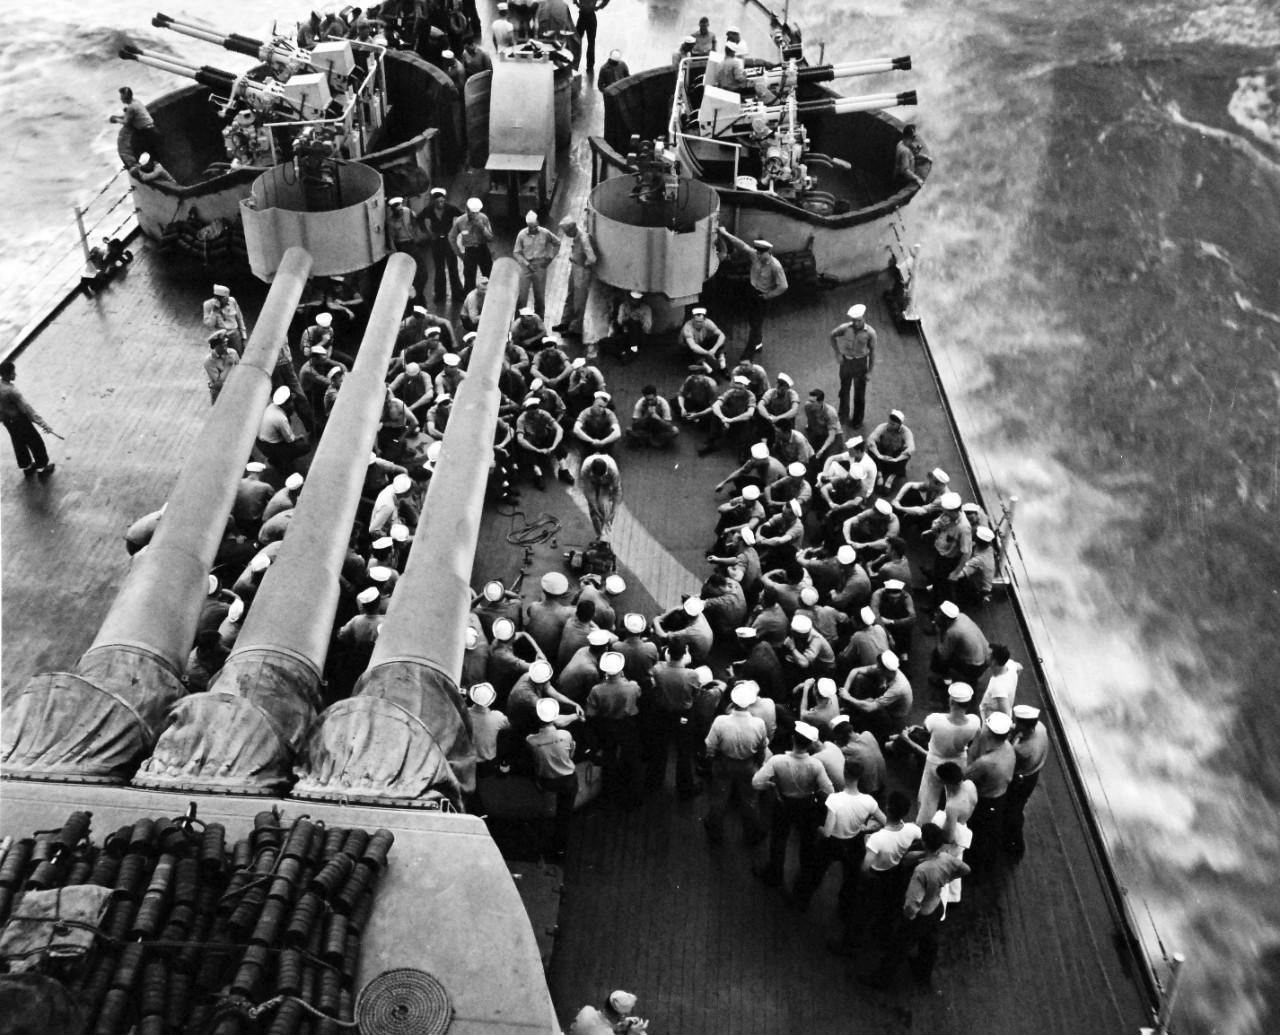 80-G-55256:   Wake Island Raid, October 5-6, 1943.    USS Minneapolis (CA 36), battle preparations are made, the morning of an attack on Wake Island, October 5, 1943.  The crew are assembled to be given instructions in flash-burn protection.   Photographed by CPU-7.  U.S. Navy photograph, now in the collections of the National Archives.  (2015/4/28).